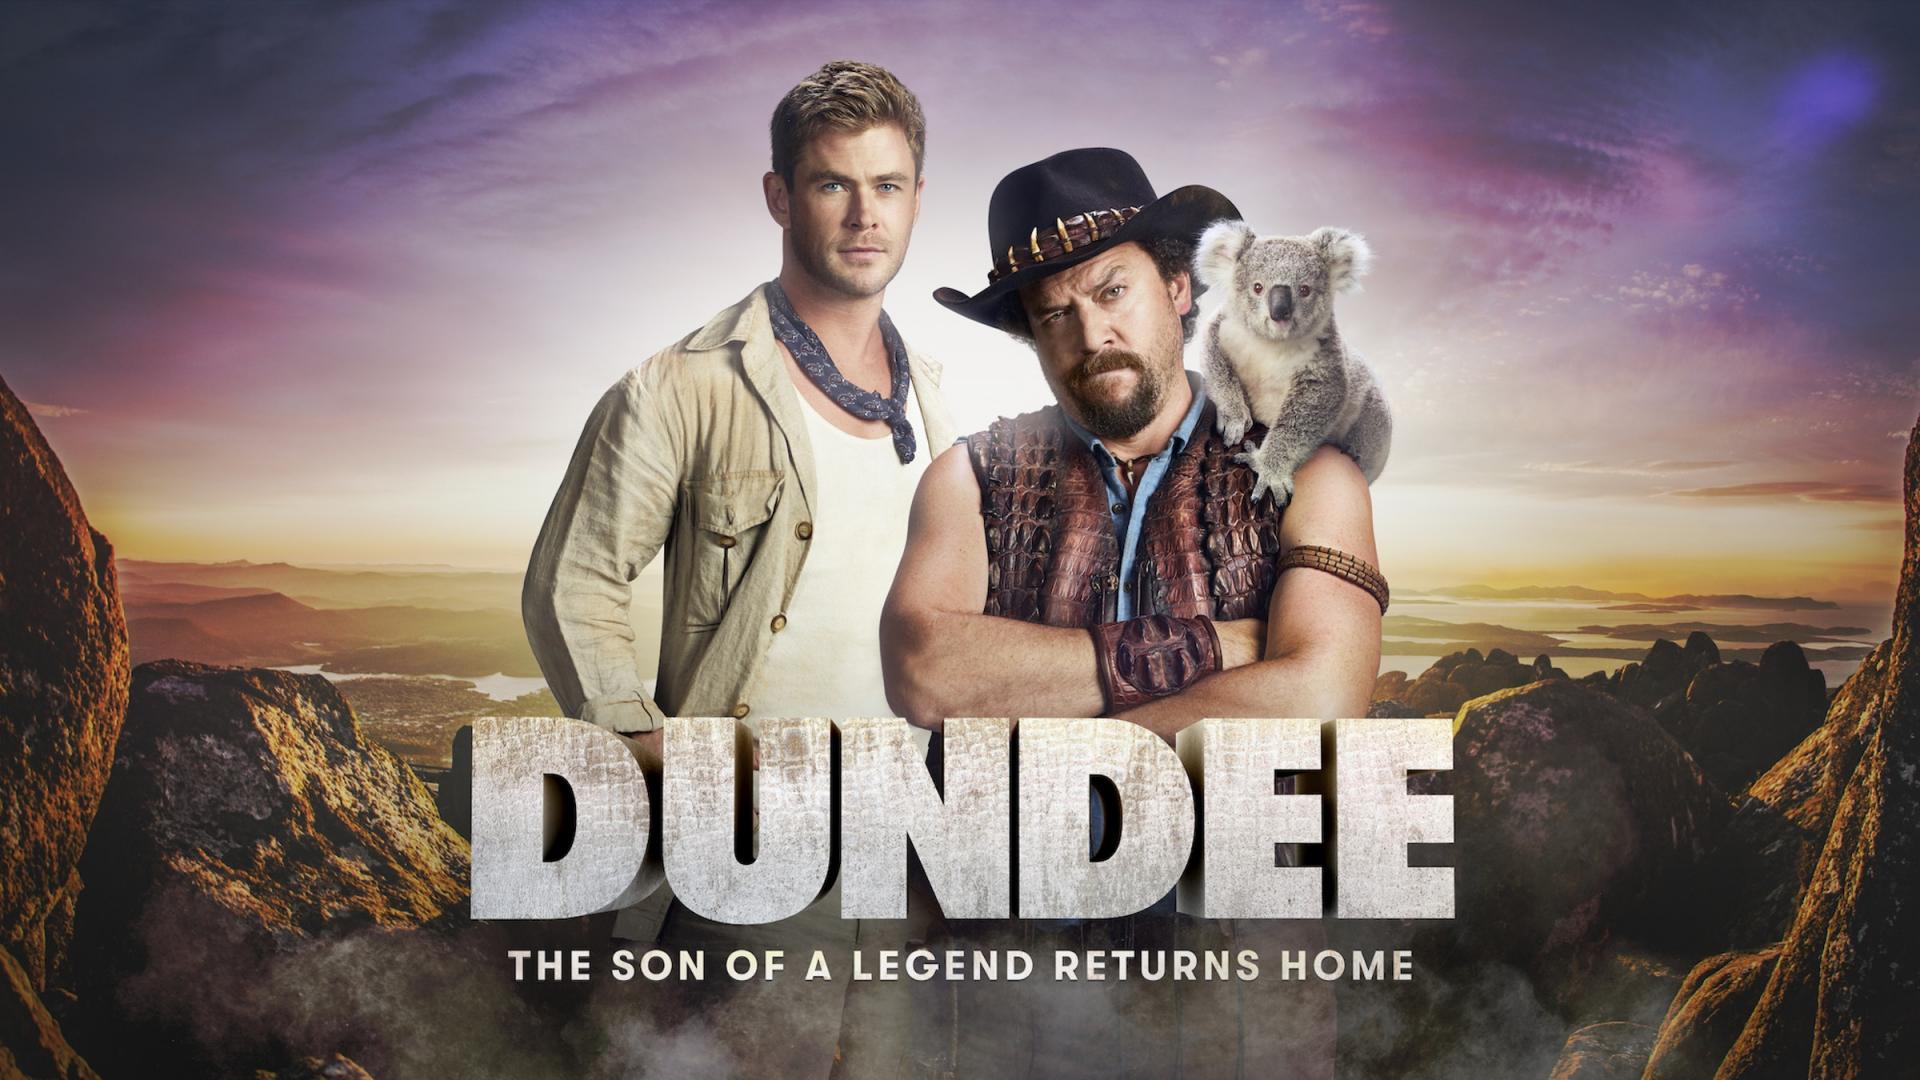 Tourism Australia: Dundee- The Son of a Legend Returns Home